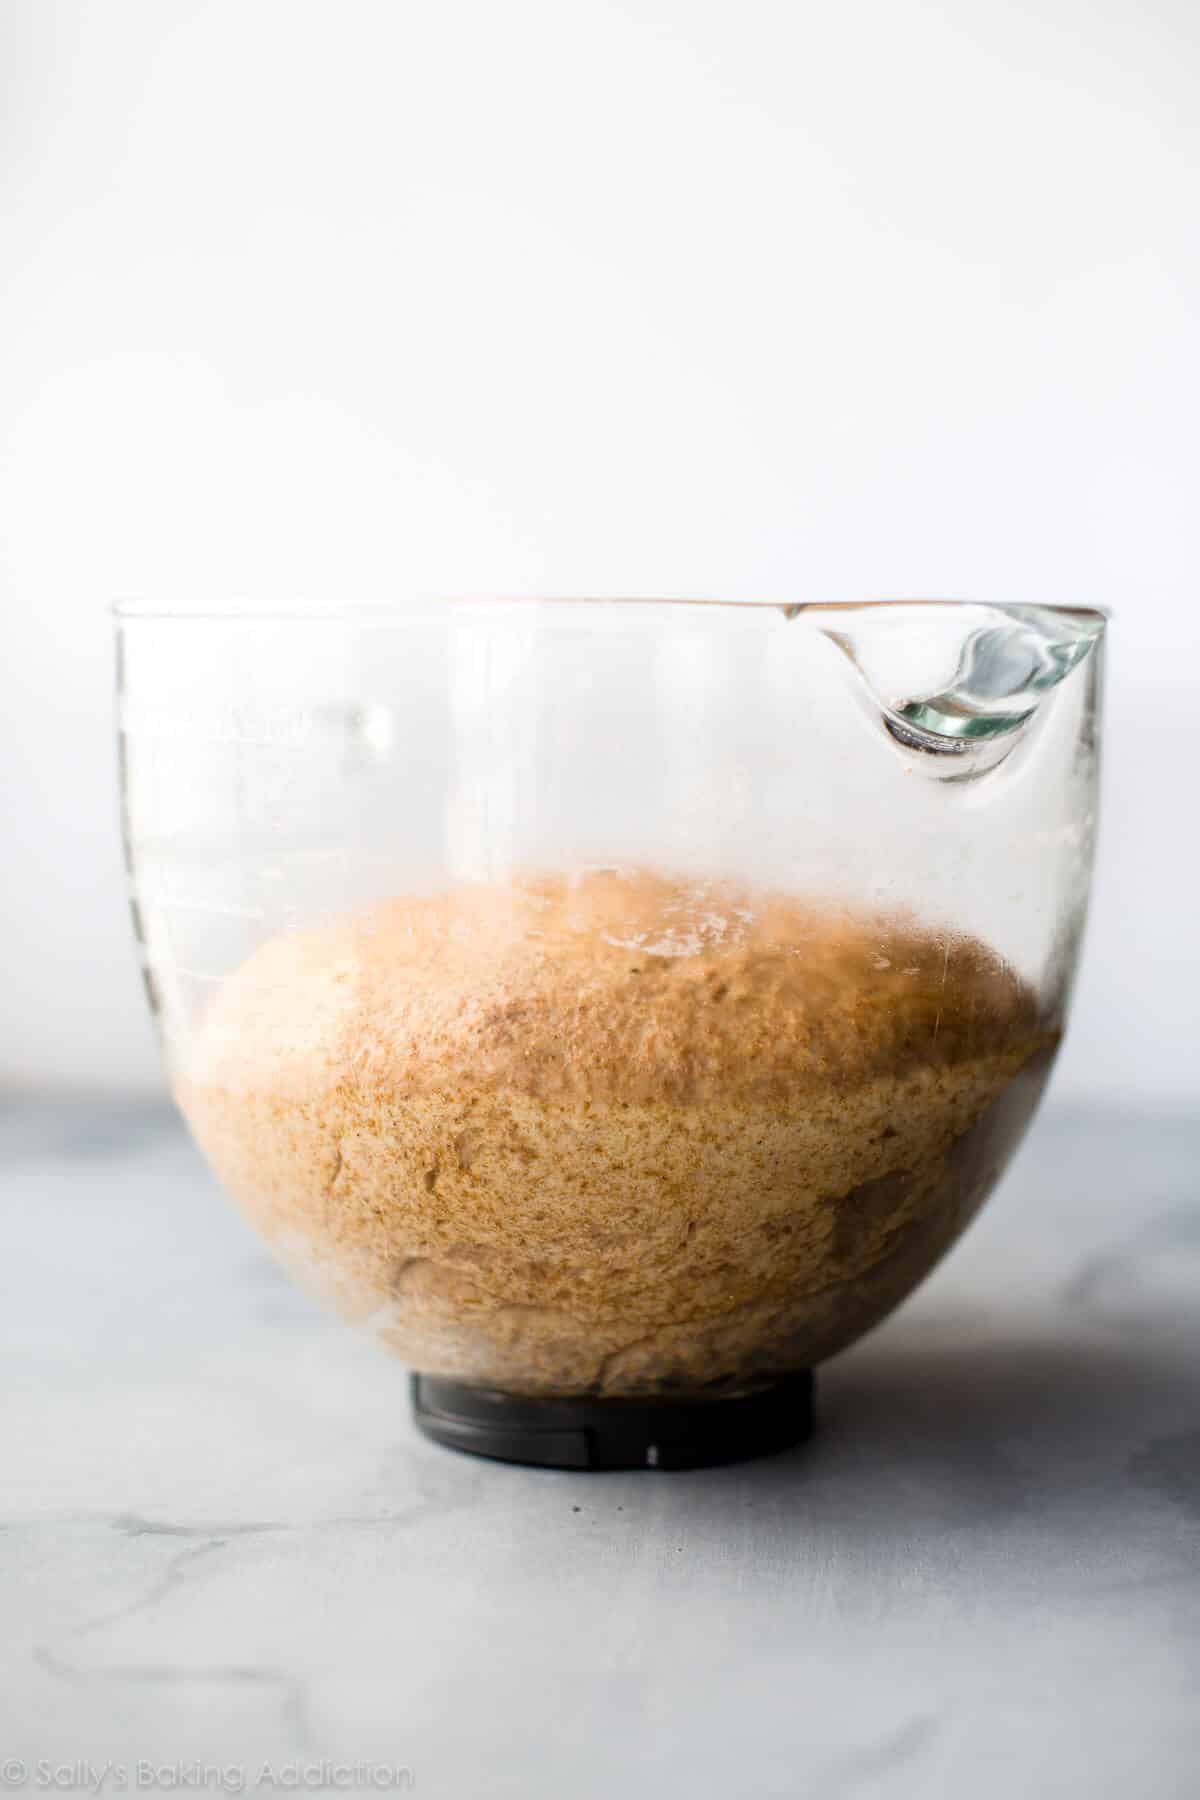 whole wheat dough rising in a glass bowl